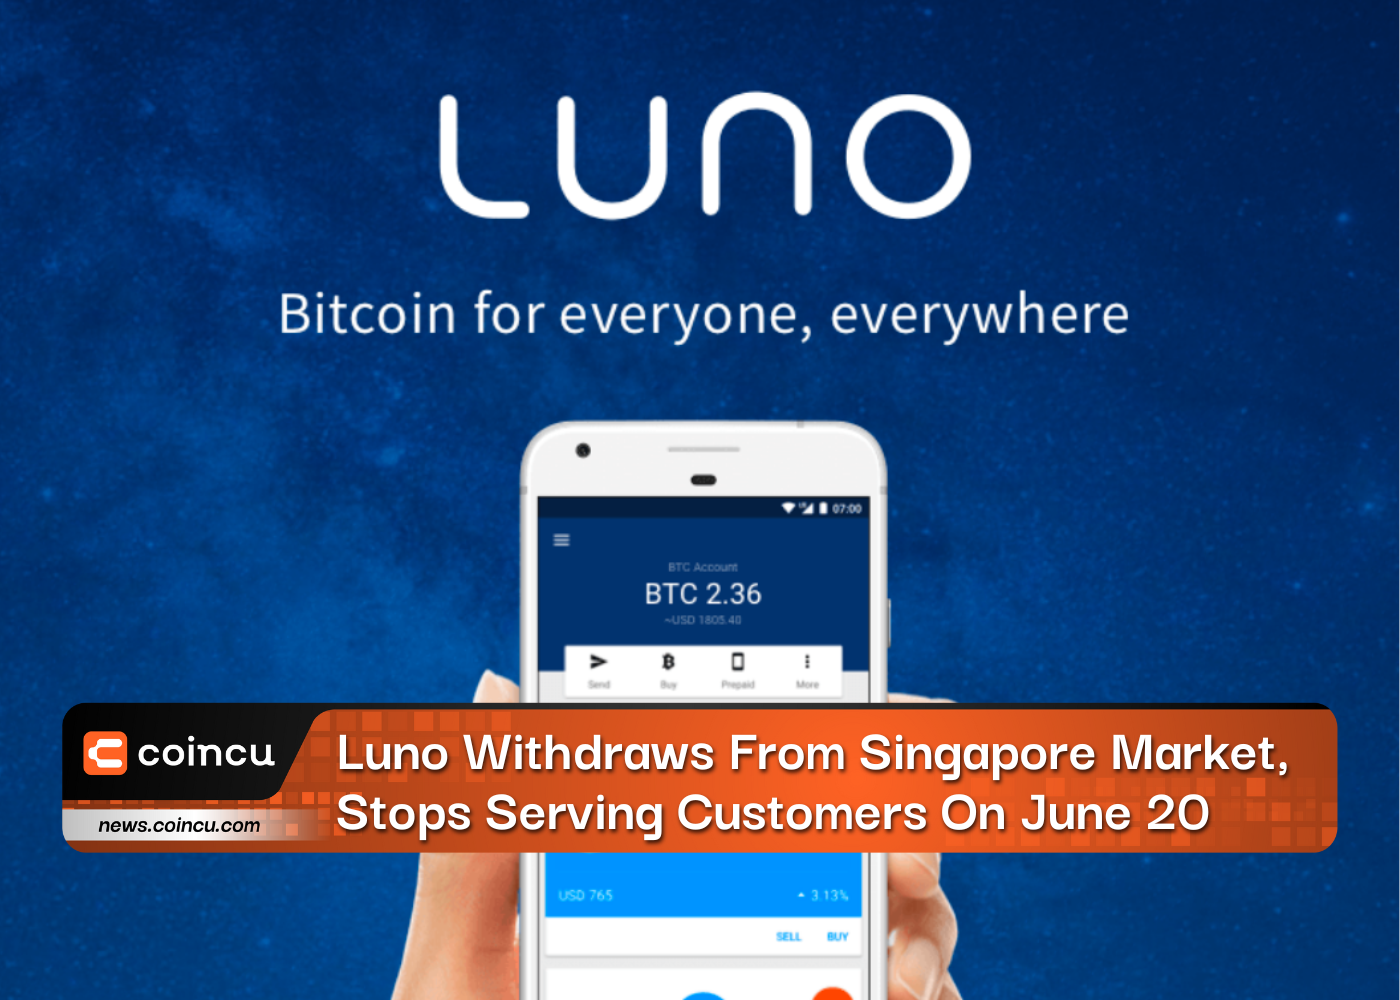 Luno Withdraws From Singapore Market, Stops Serving Customers On June 20